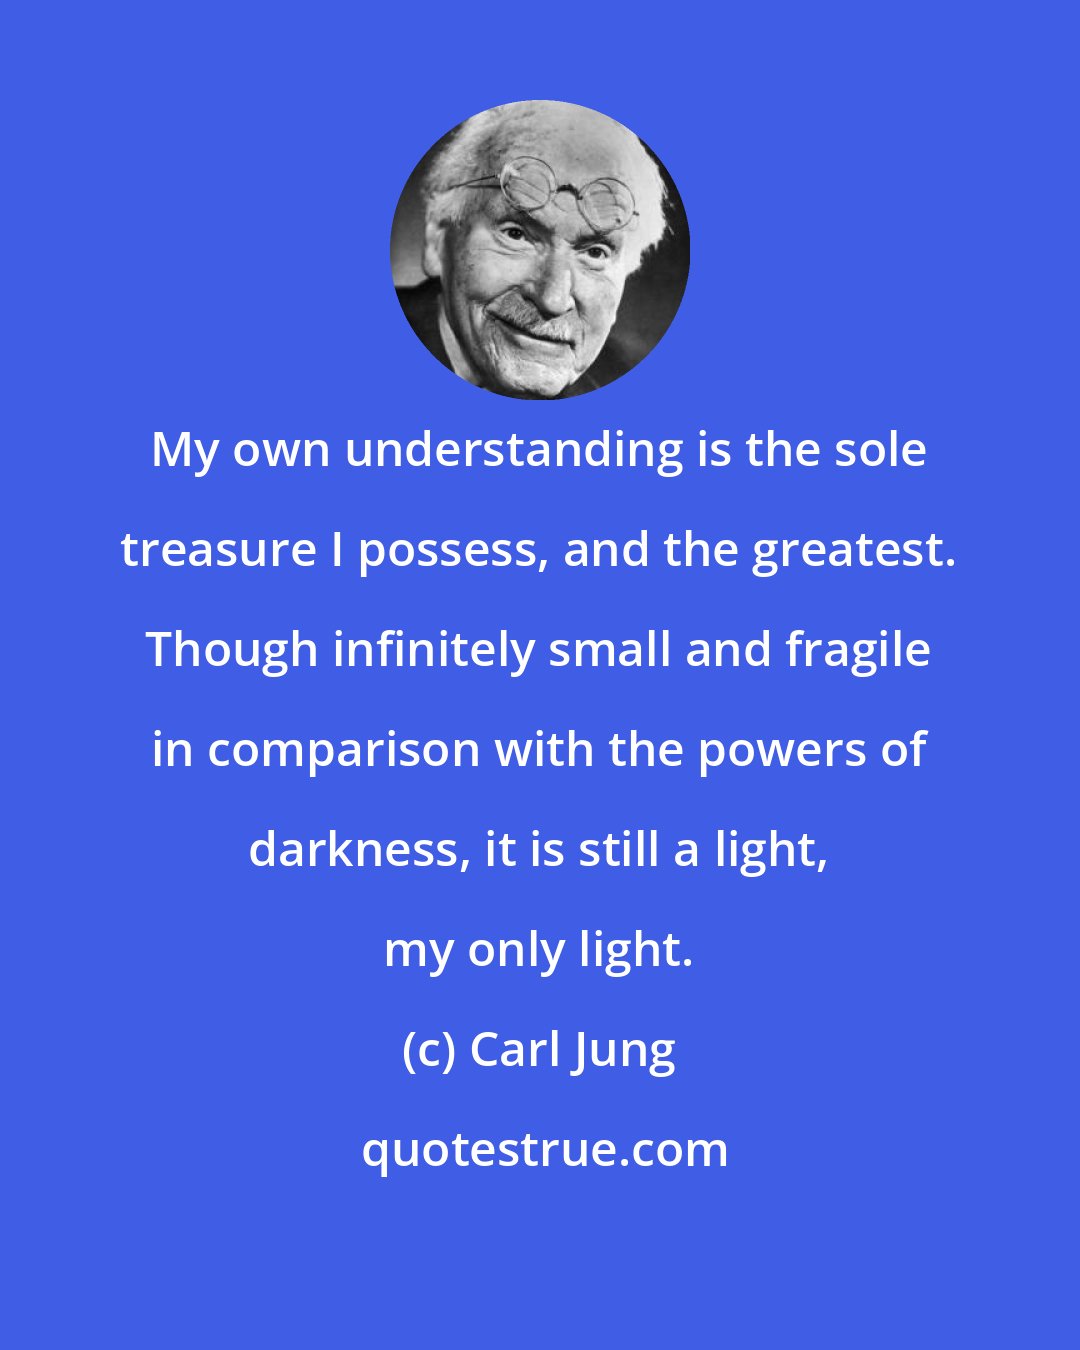 Carl Jung: My own understanding is the sole treasure I possess, and the greatest. Though infinitely small and fragile in comparison with the powers of darkness, it is still a light, my only light.